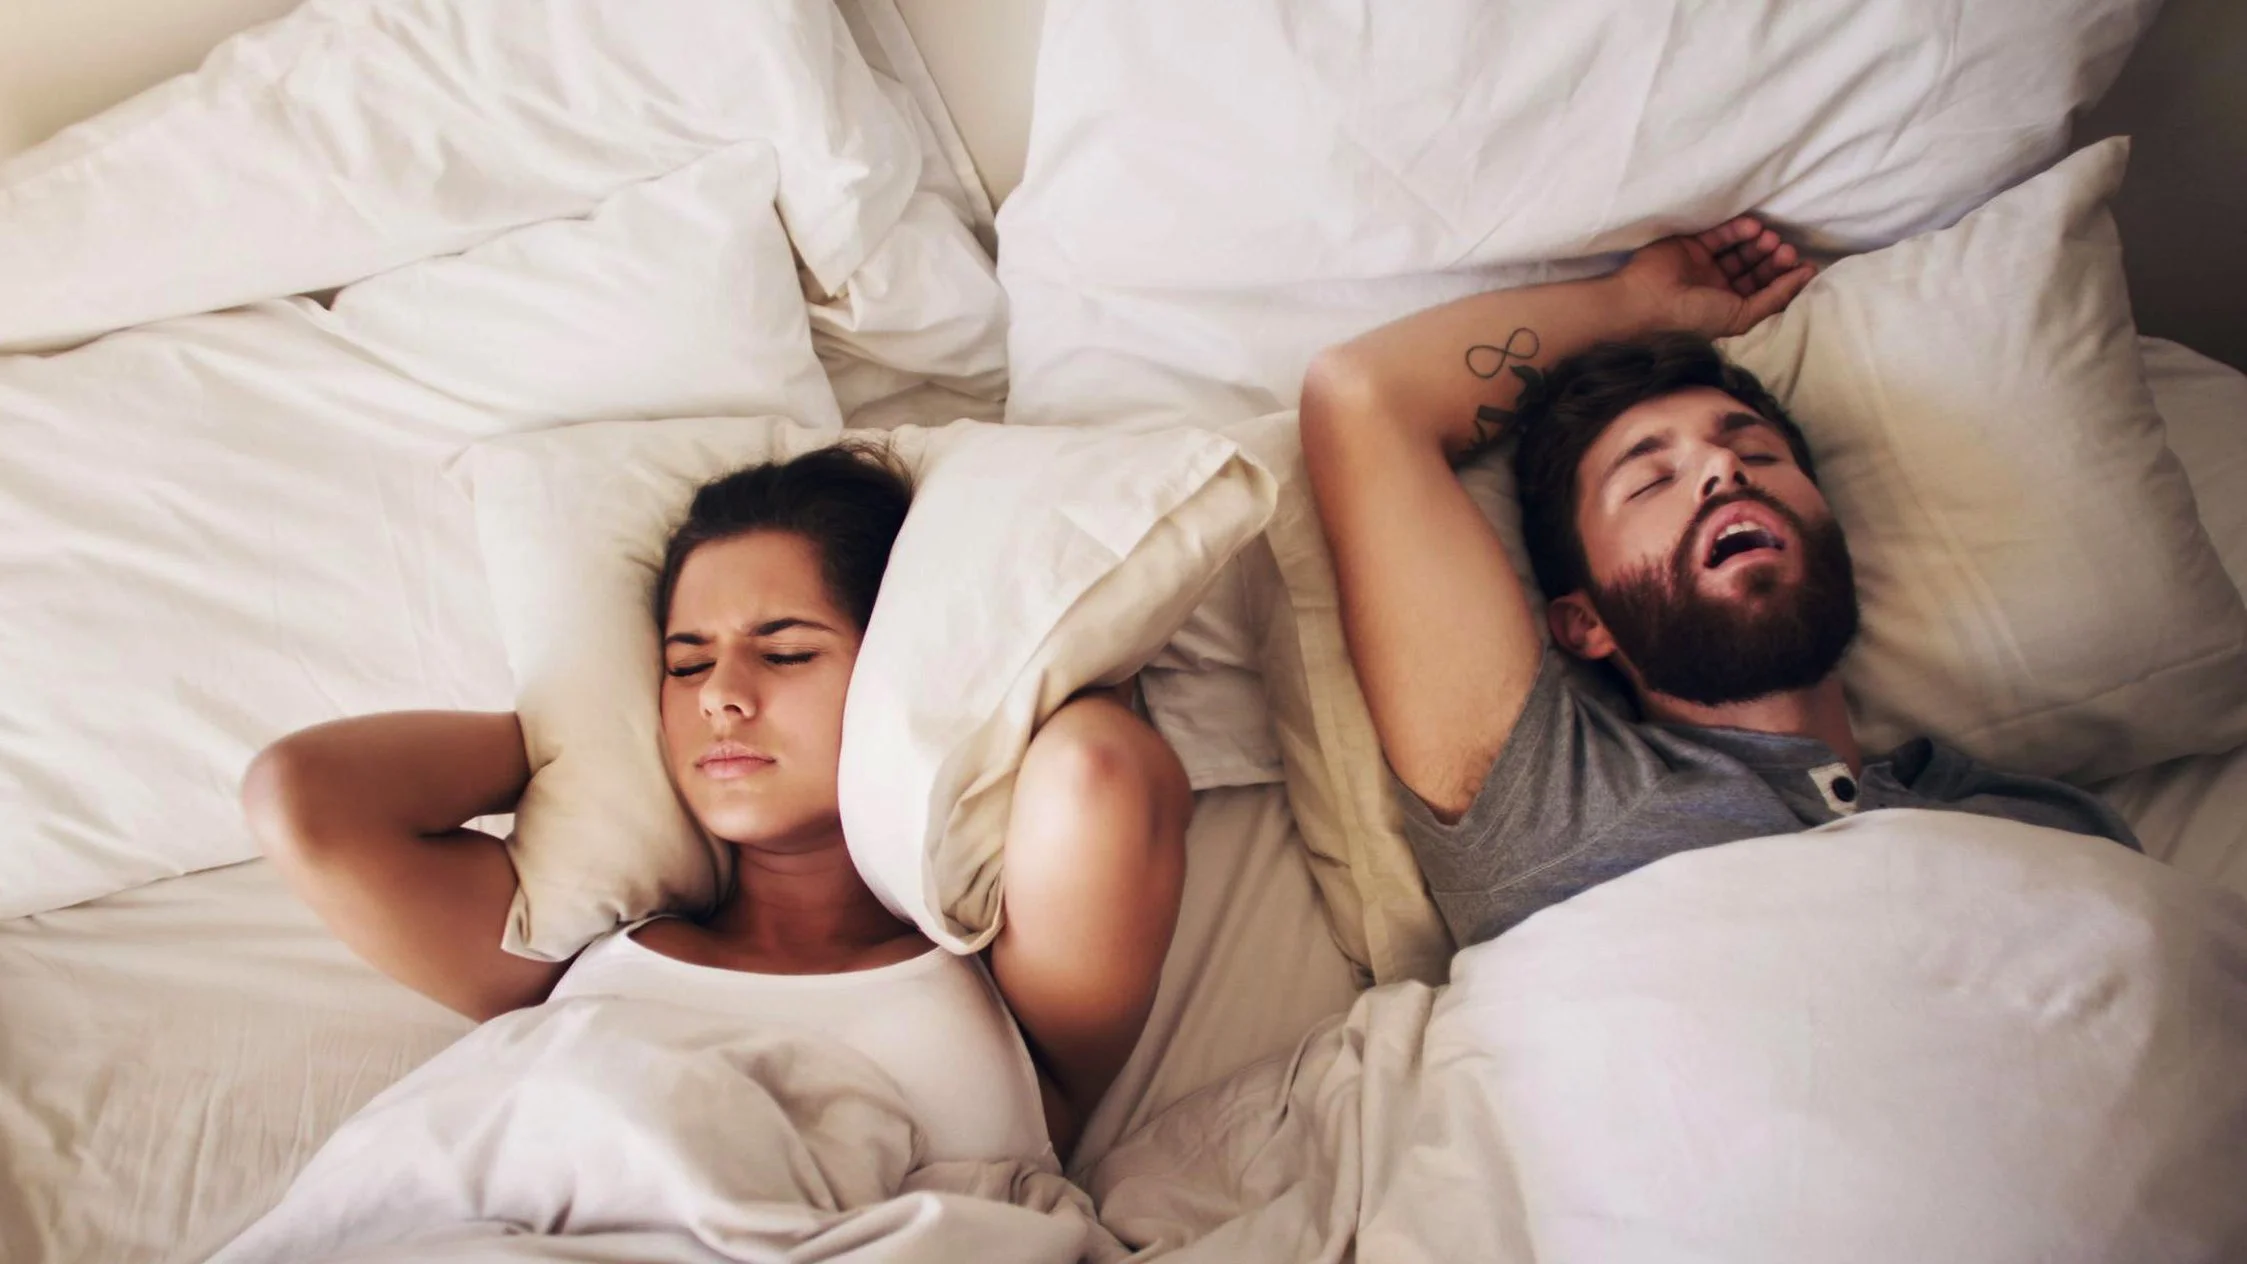 A woman covers her ears with a pillow while a man snores while sleeping